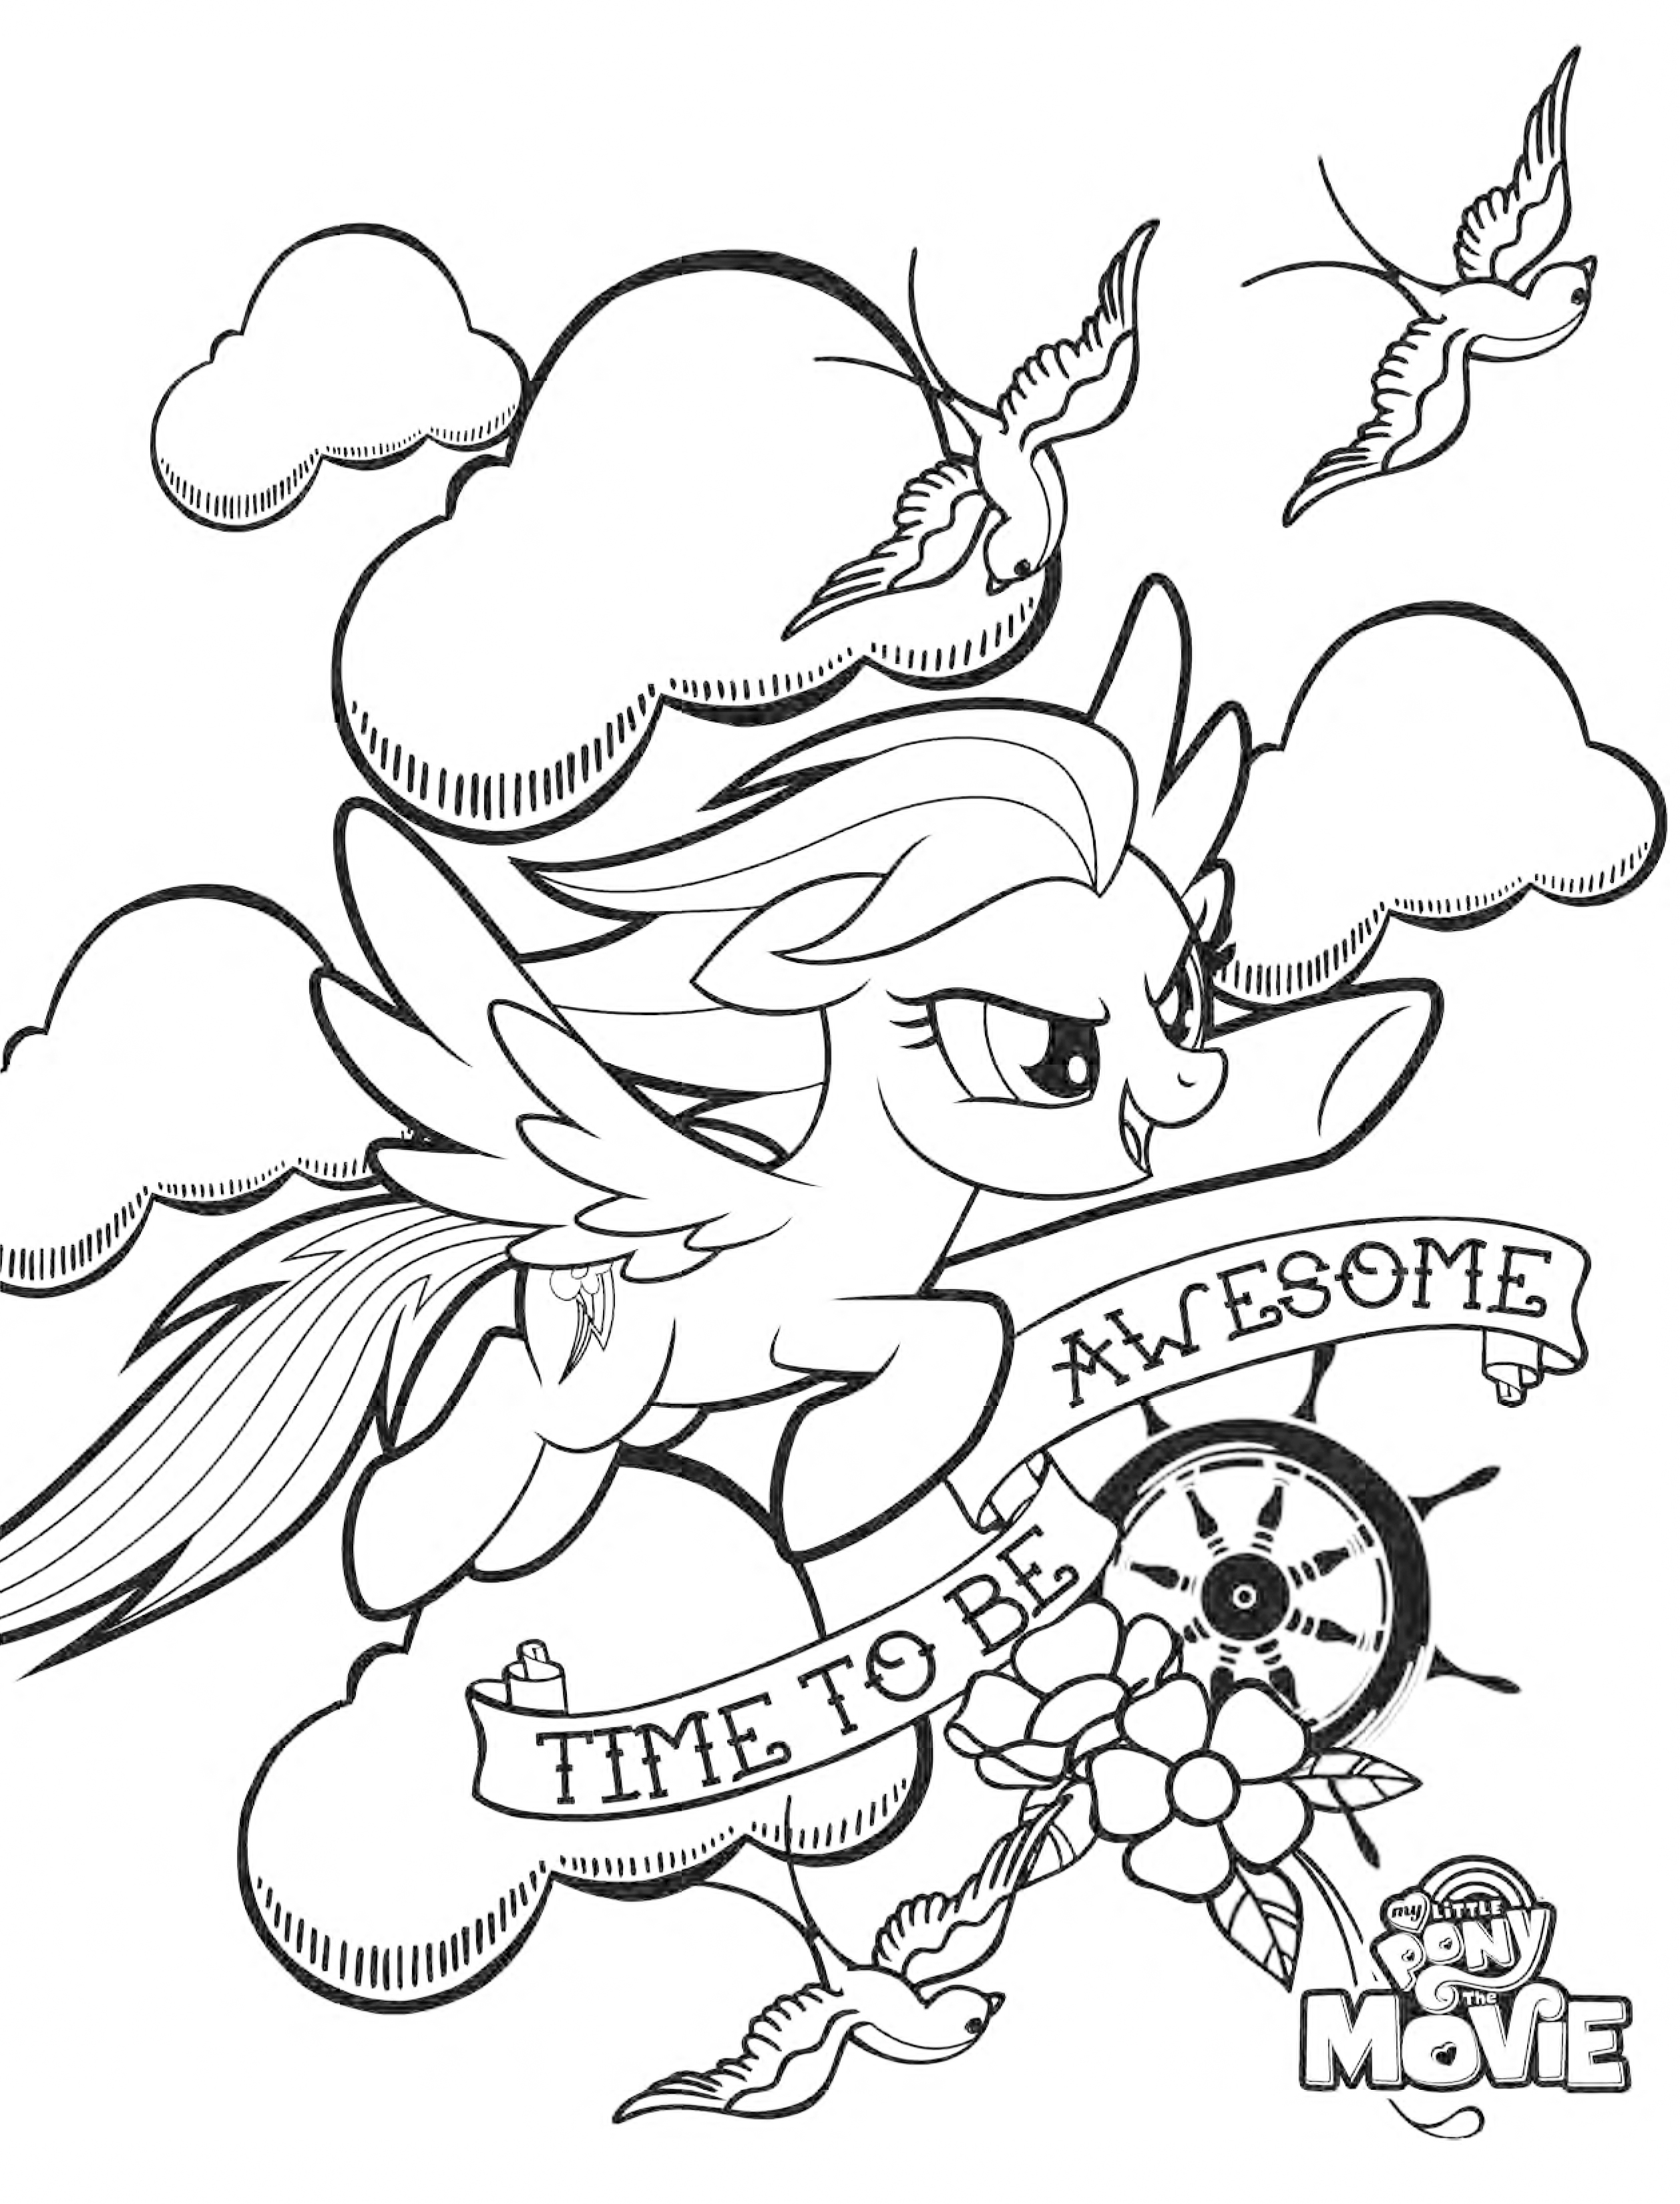 My Little Pony The Movie Coloring Pages Youloveit Com My little pony space mares movie g5 (1990). youloveit com